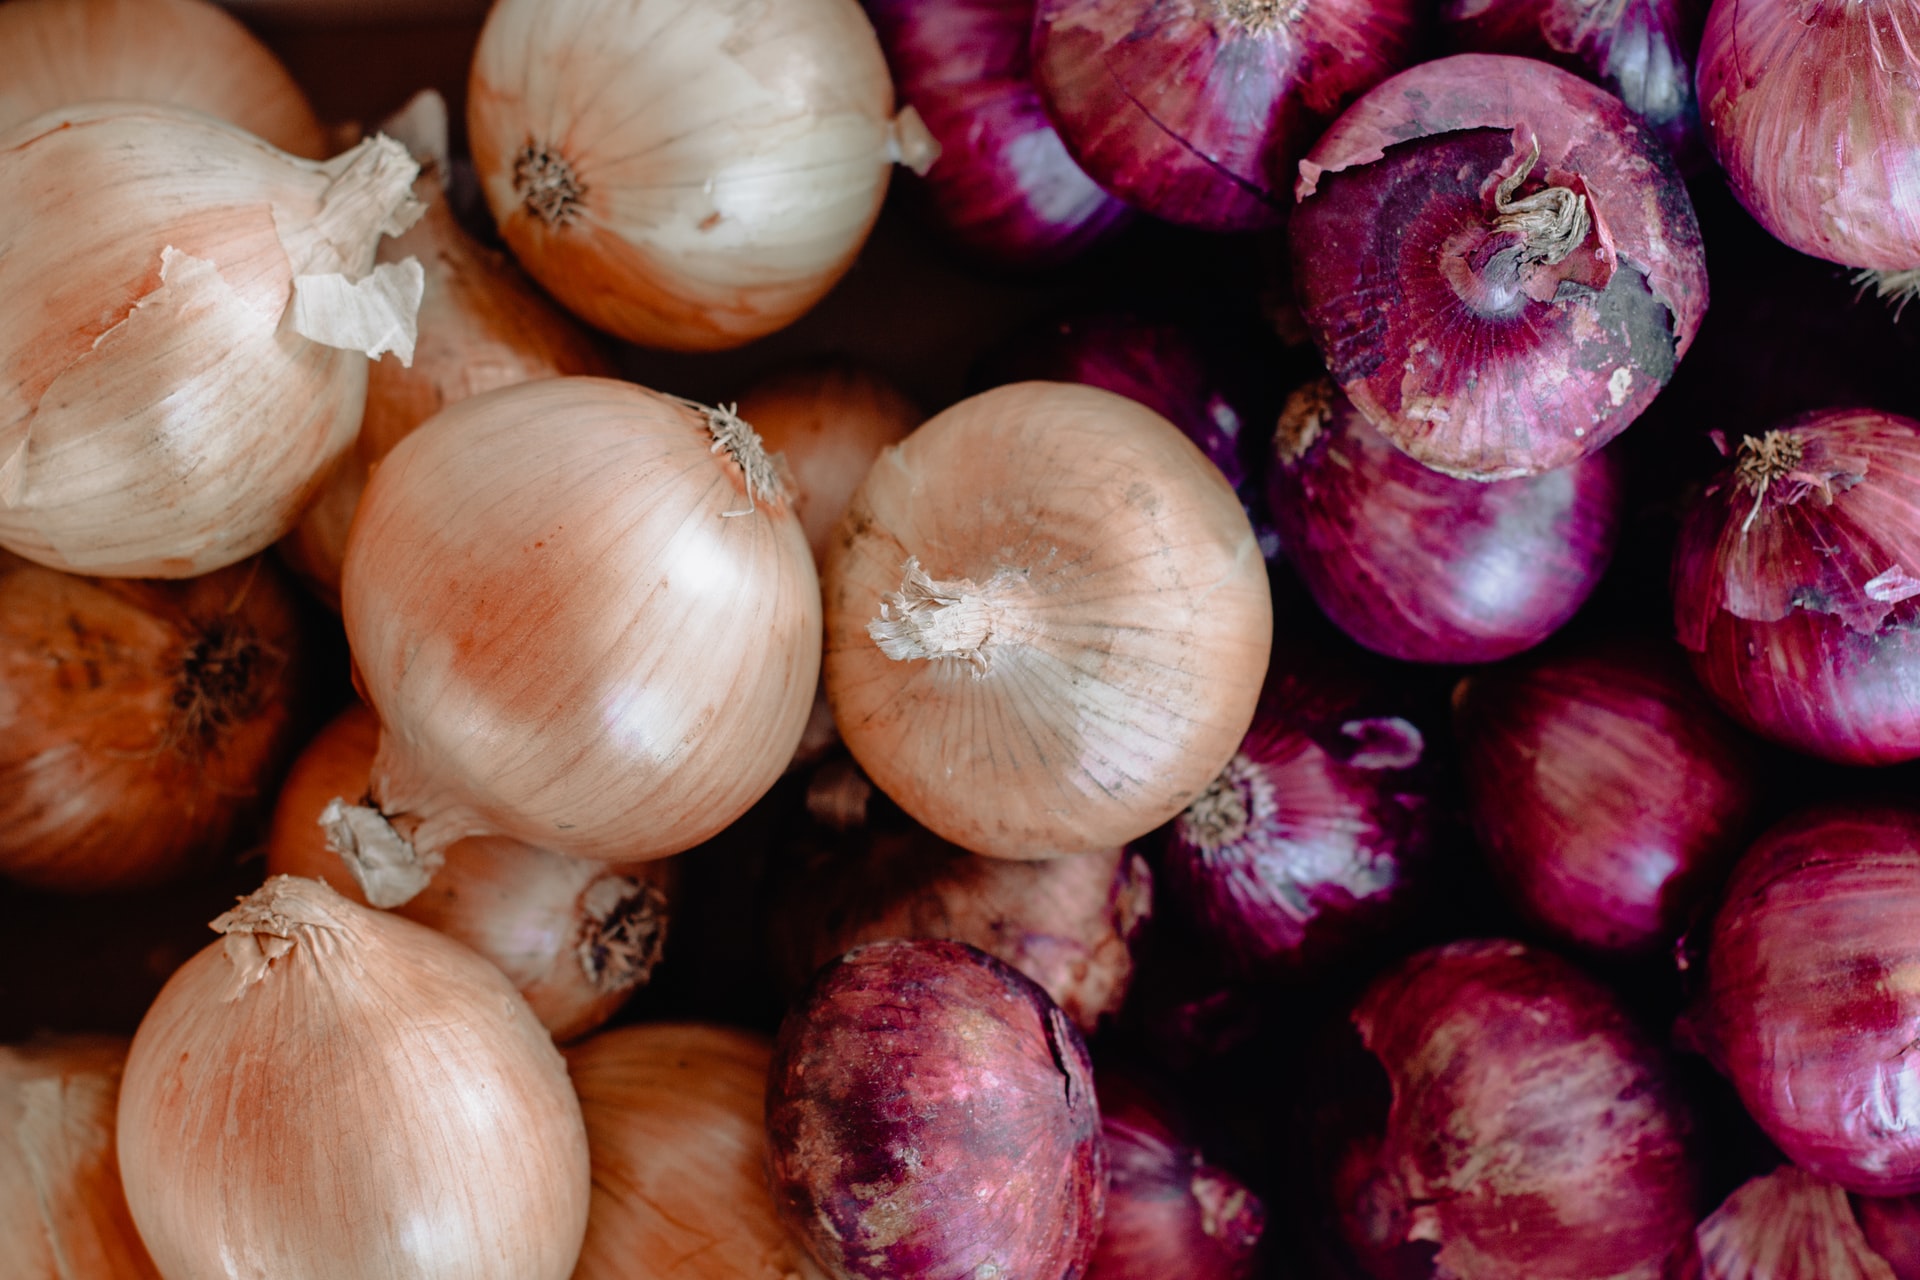 A box of yellow and red onions